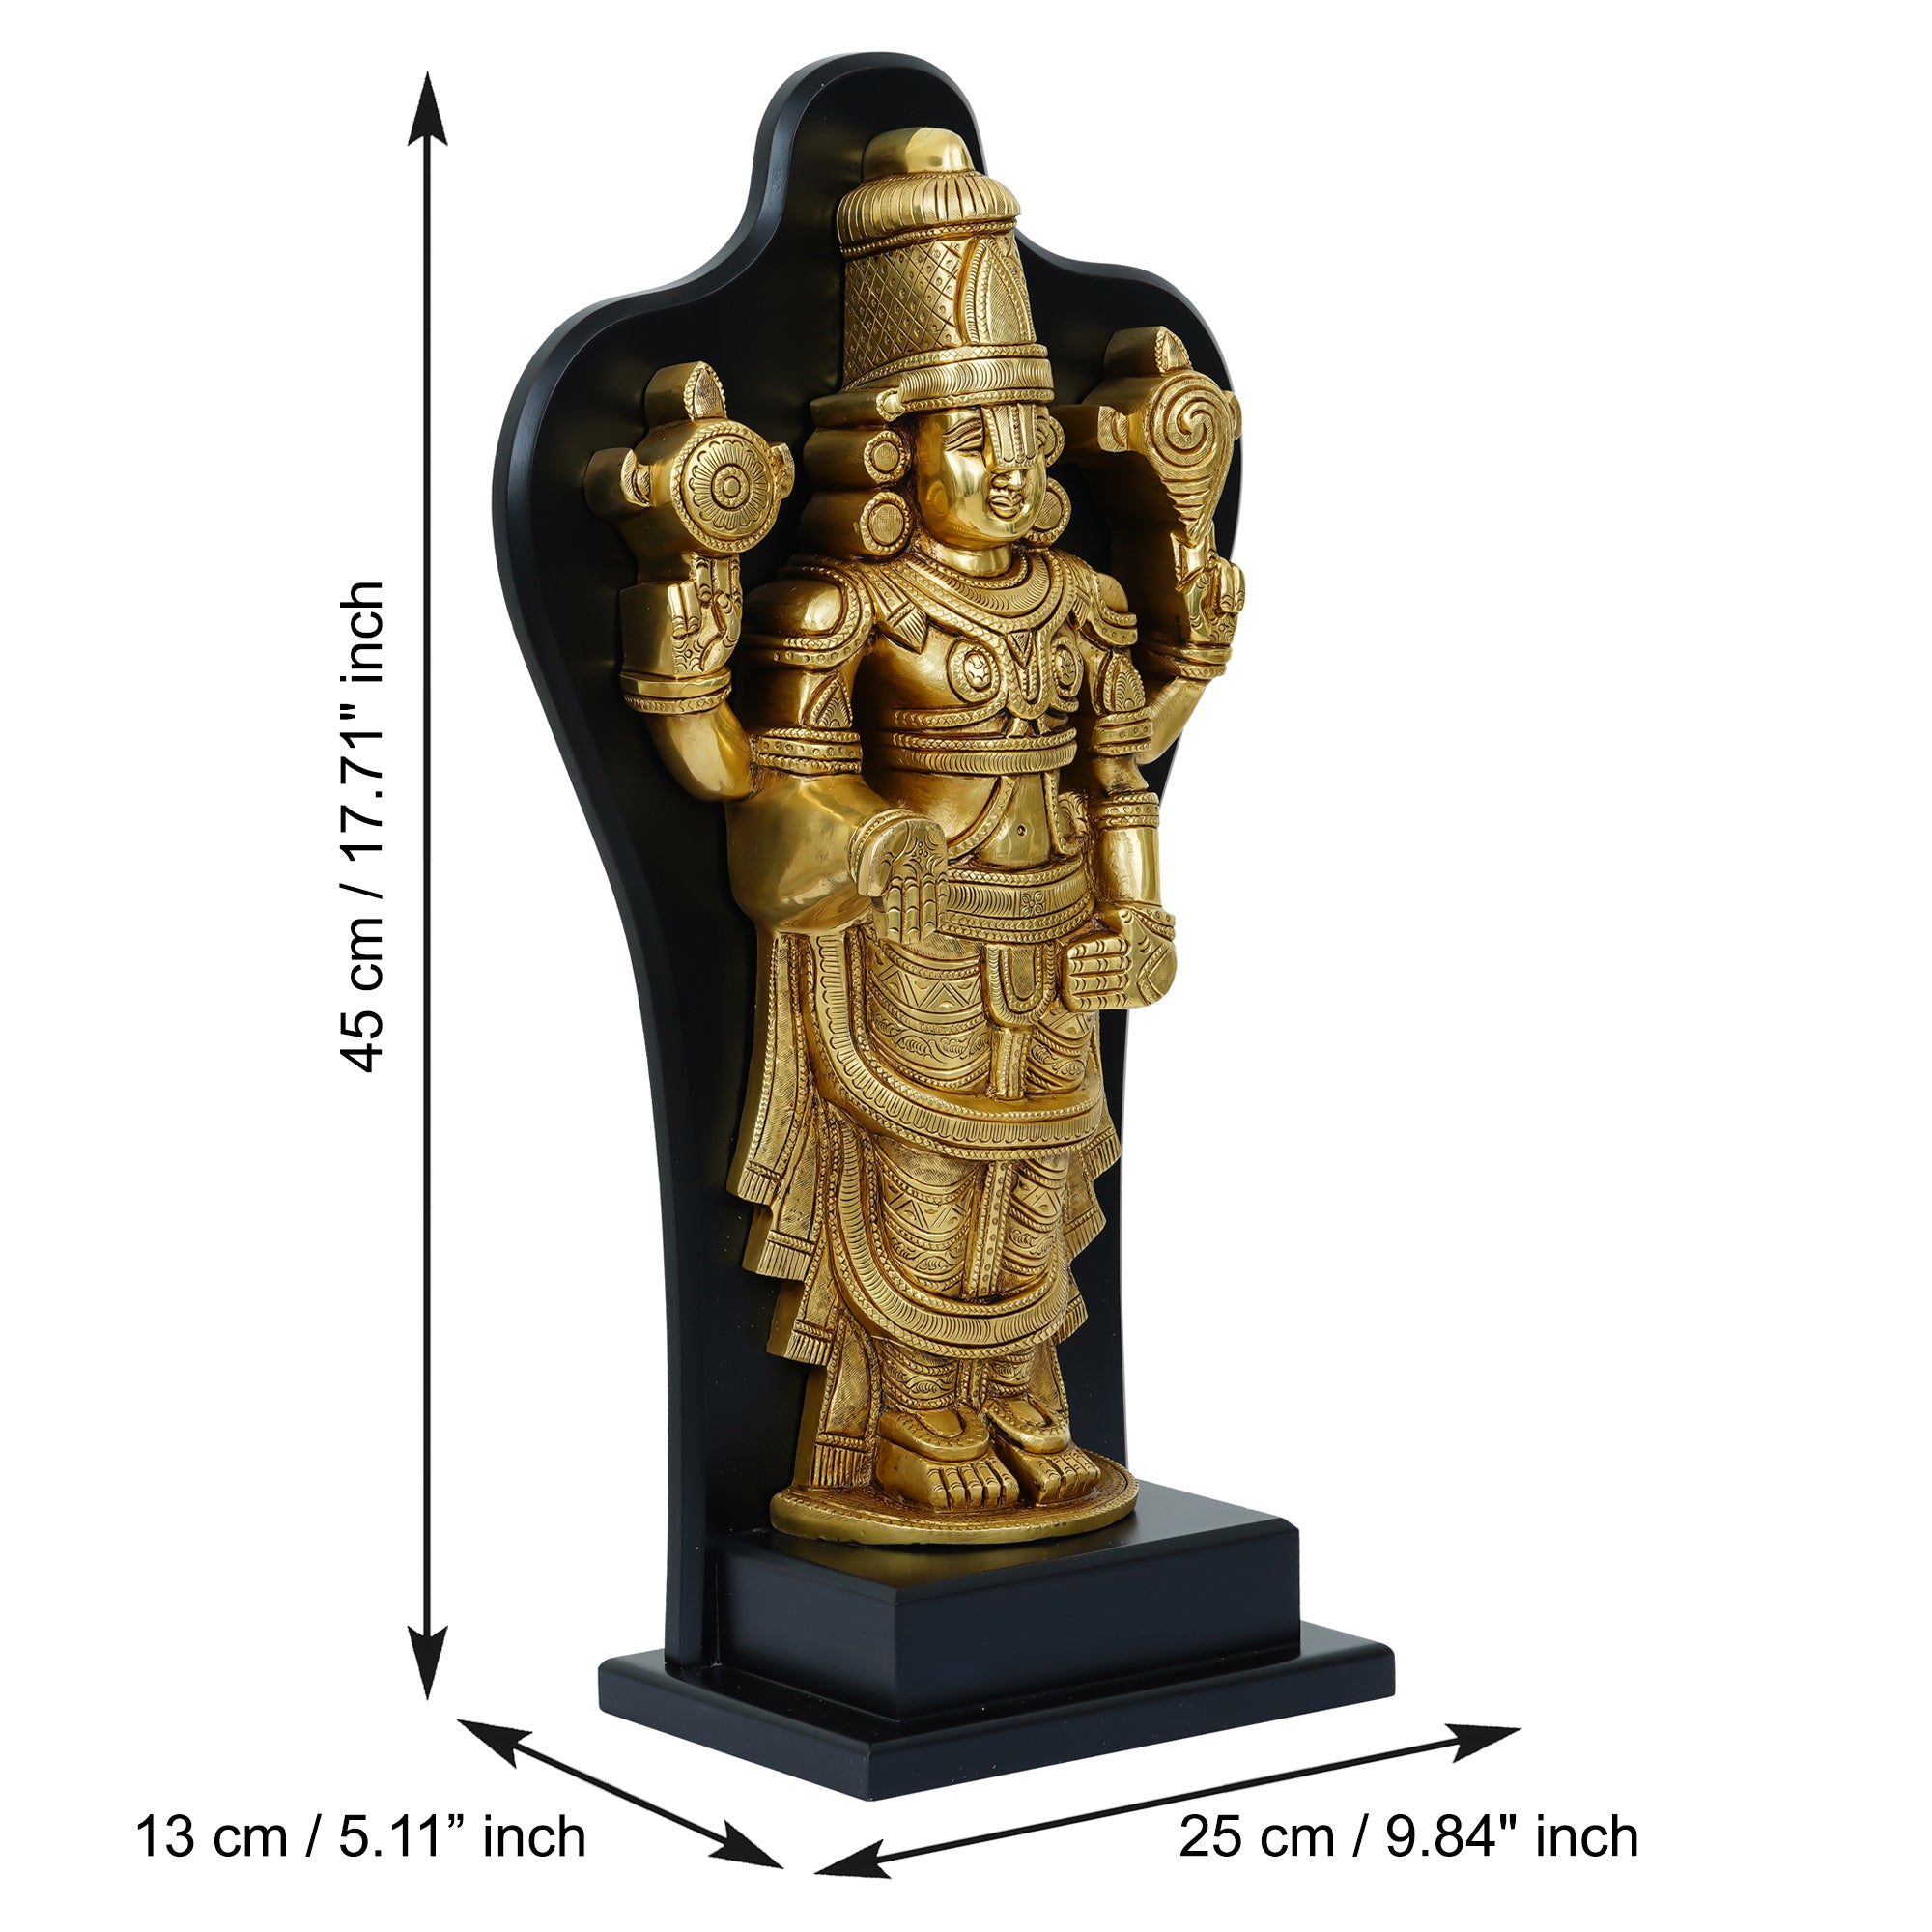 Golden Brass Handcrafted Lord Balaji Statue on Wooden Base 3